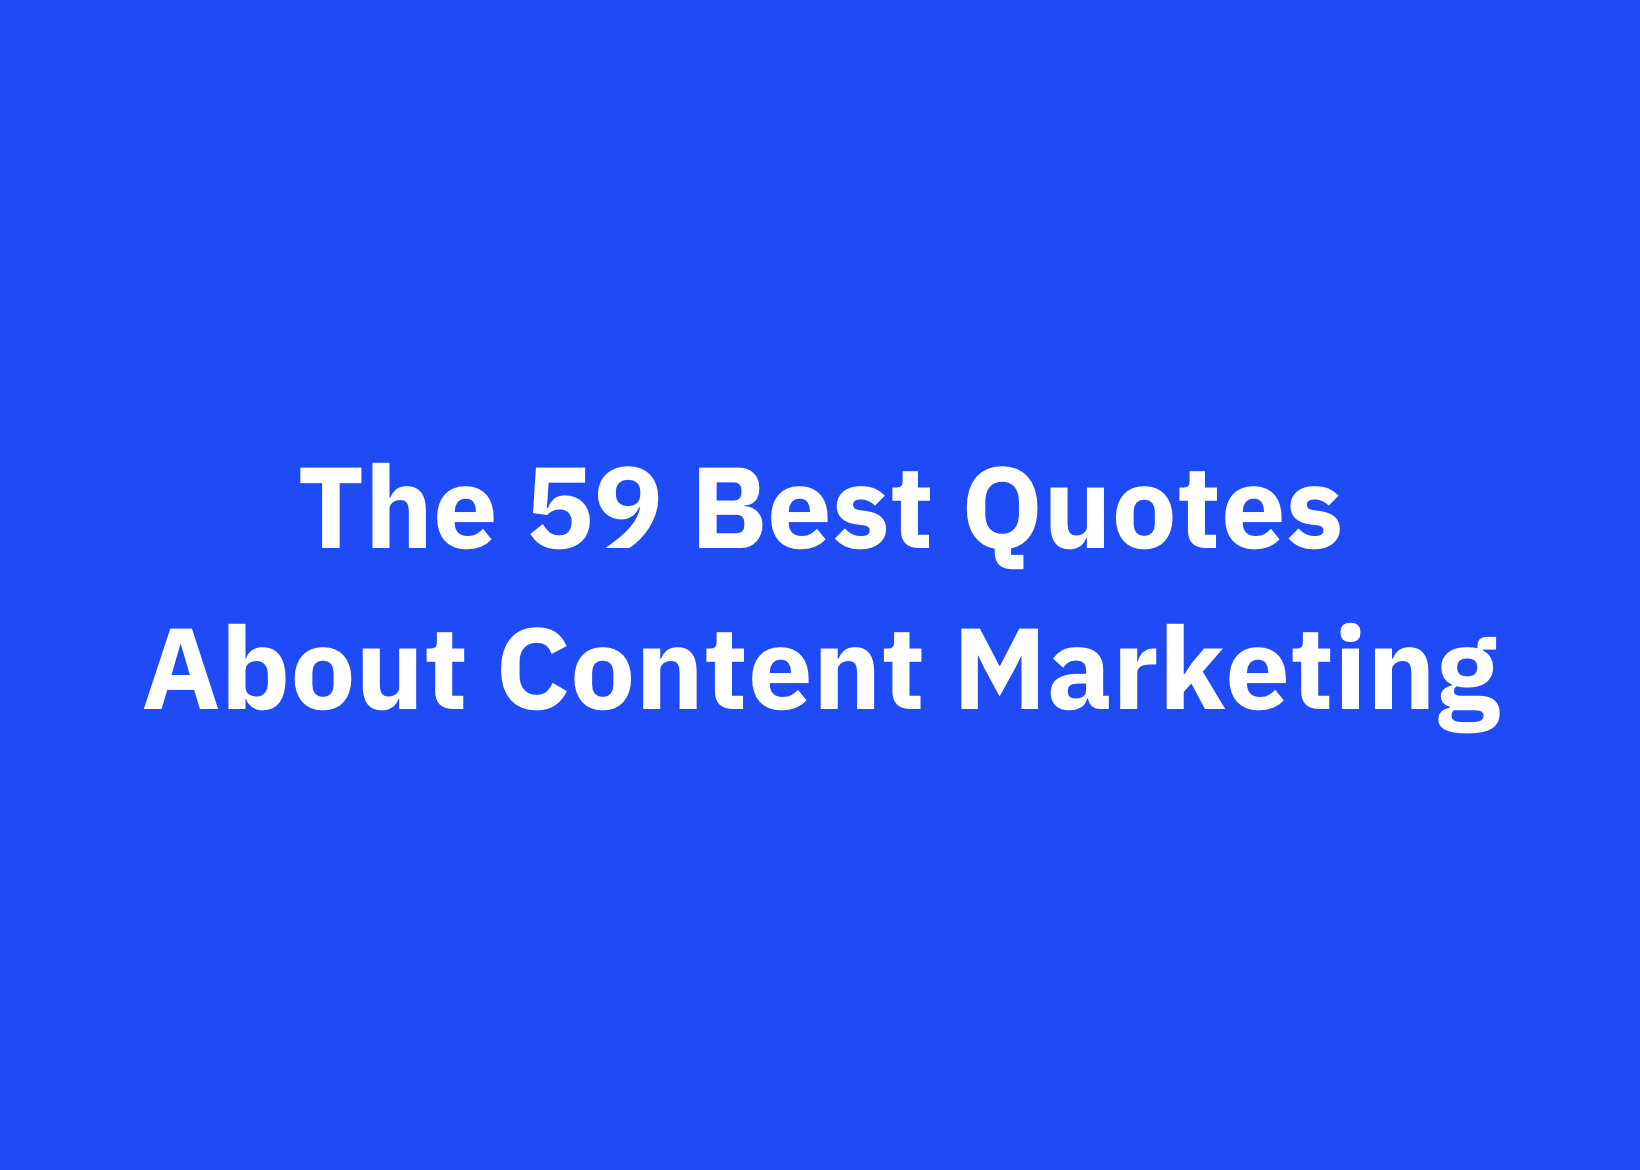 59 Content Marketing Quotes That Will Make You a Better Marketer